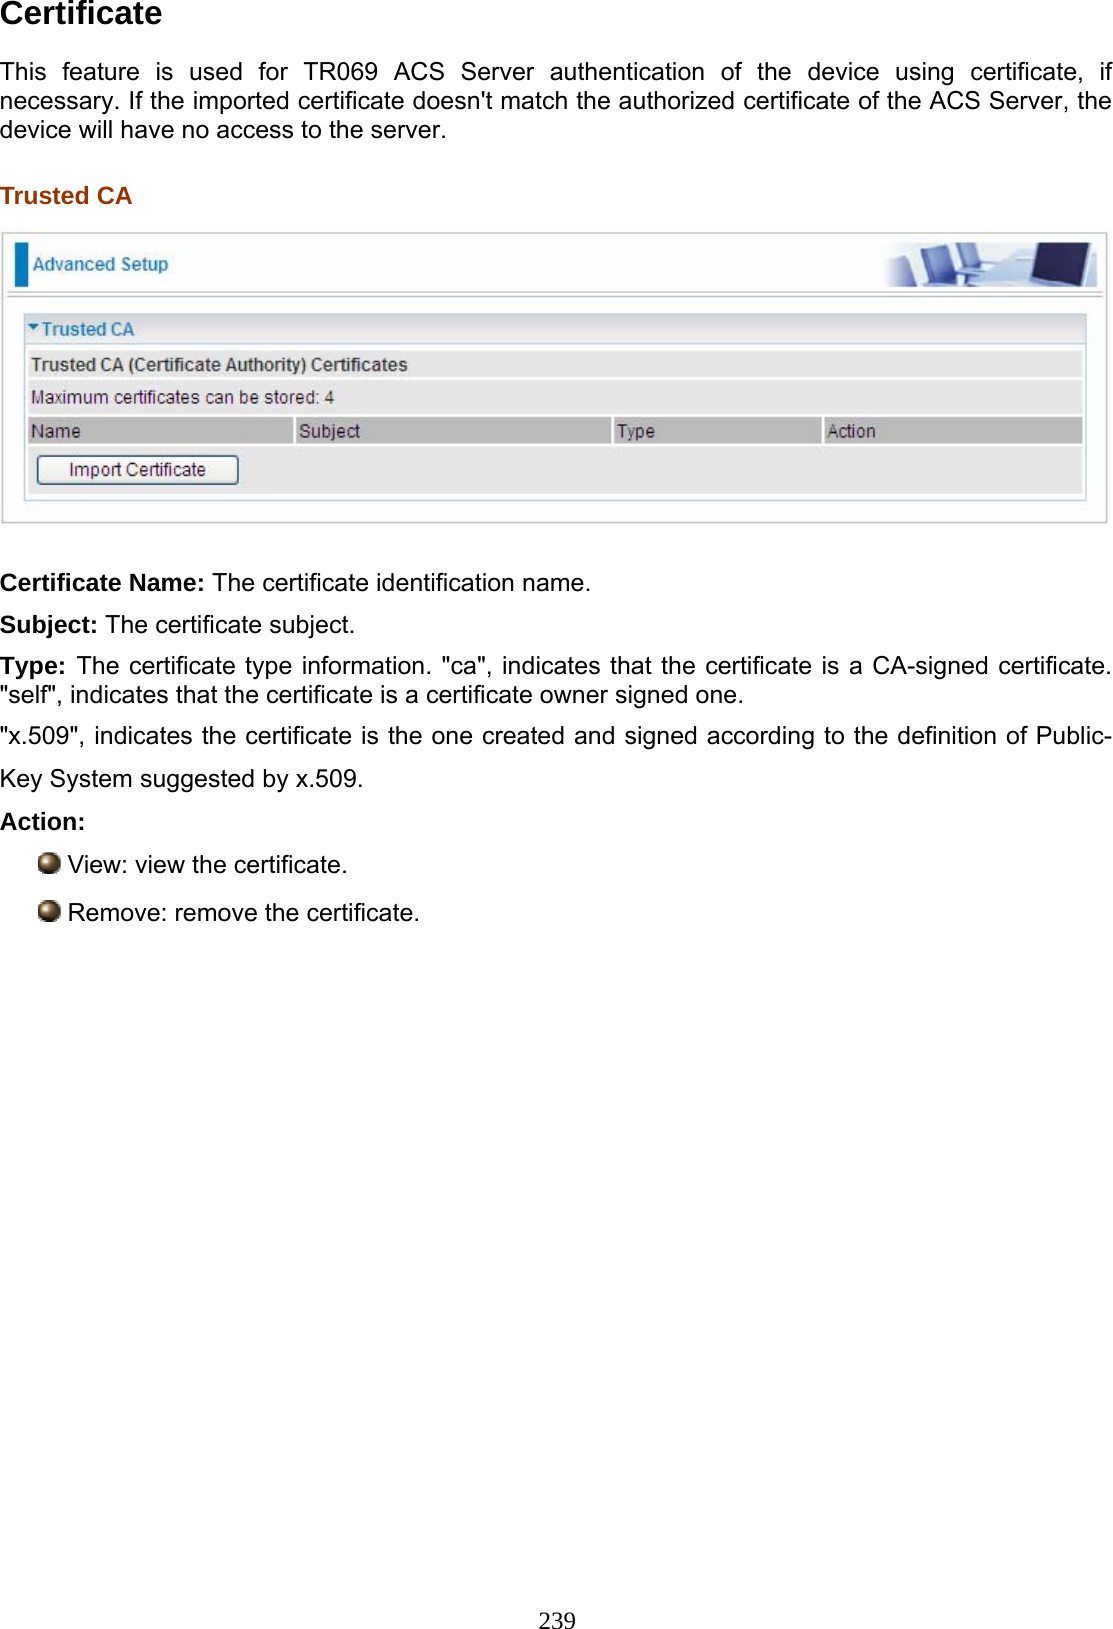 239 Certificate  This feature is used for TR069 ACS Server authentication of the device using certificate, if necessary. If the imported certificate doesn&apos;t match the authorized certificate of the ACS Server, the device will have no access to the server.  Trusted CA   Certificate Name: The certificate identification name. Subject: The certificate subject. Type: The certificate type information. &quot;ca&quot;, indicates that the certificate is a CA-signed certificate. &quot;self&quot;, indicates that the certificate is a certificate owner signed one. &quot;x.509&quot;, indicates the certificate is the one created and signed according to the definition of Public-Key System suggested by x.509. Action:  View: view the certificate.  Remove: remove the certificate.            